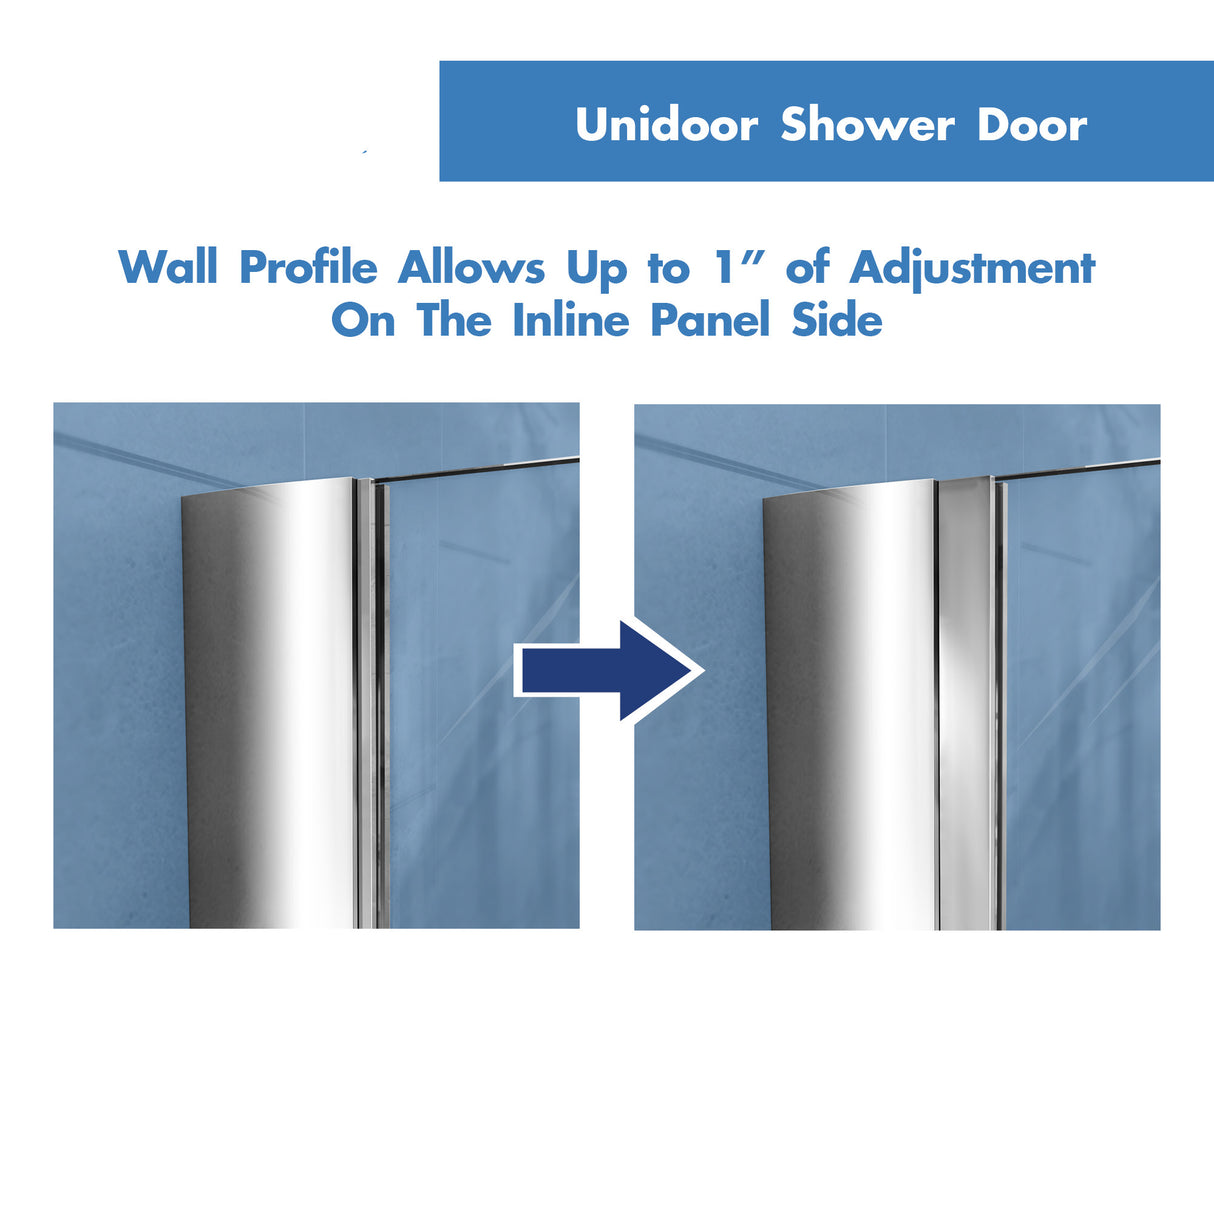 DreamLine Unidoor 40-41 in. W x 72 in. H Frameless Hinged Shower Door with Support Arm in Chrome